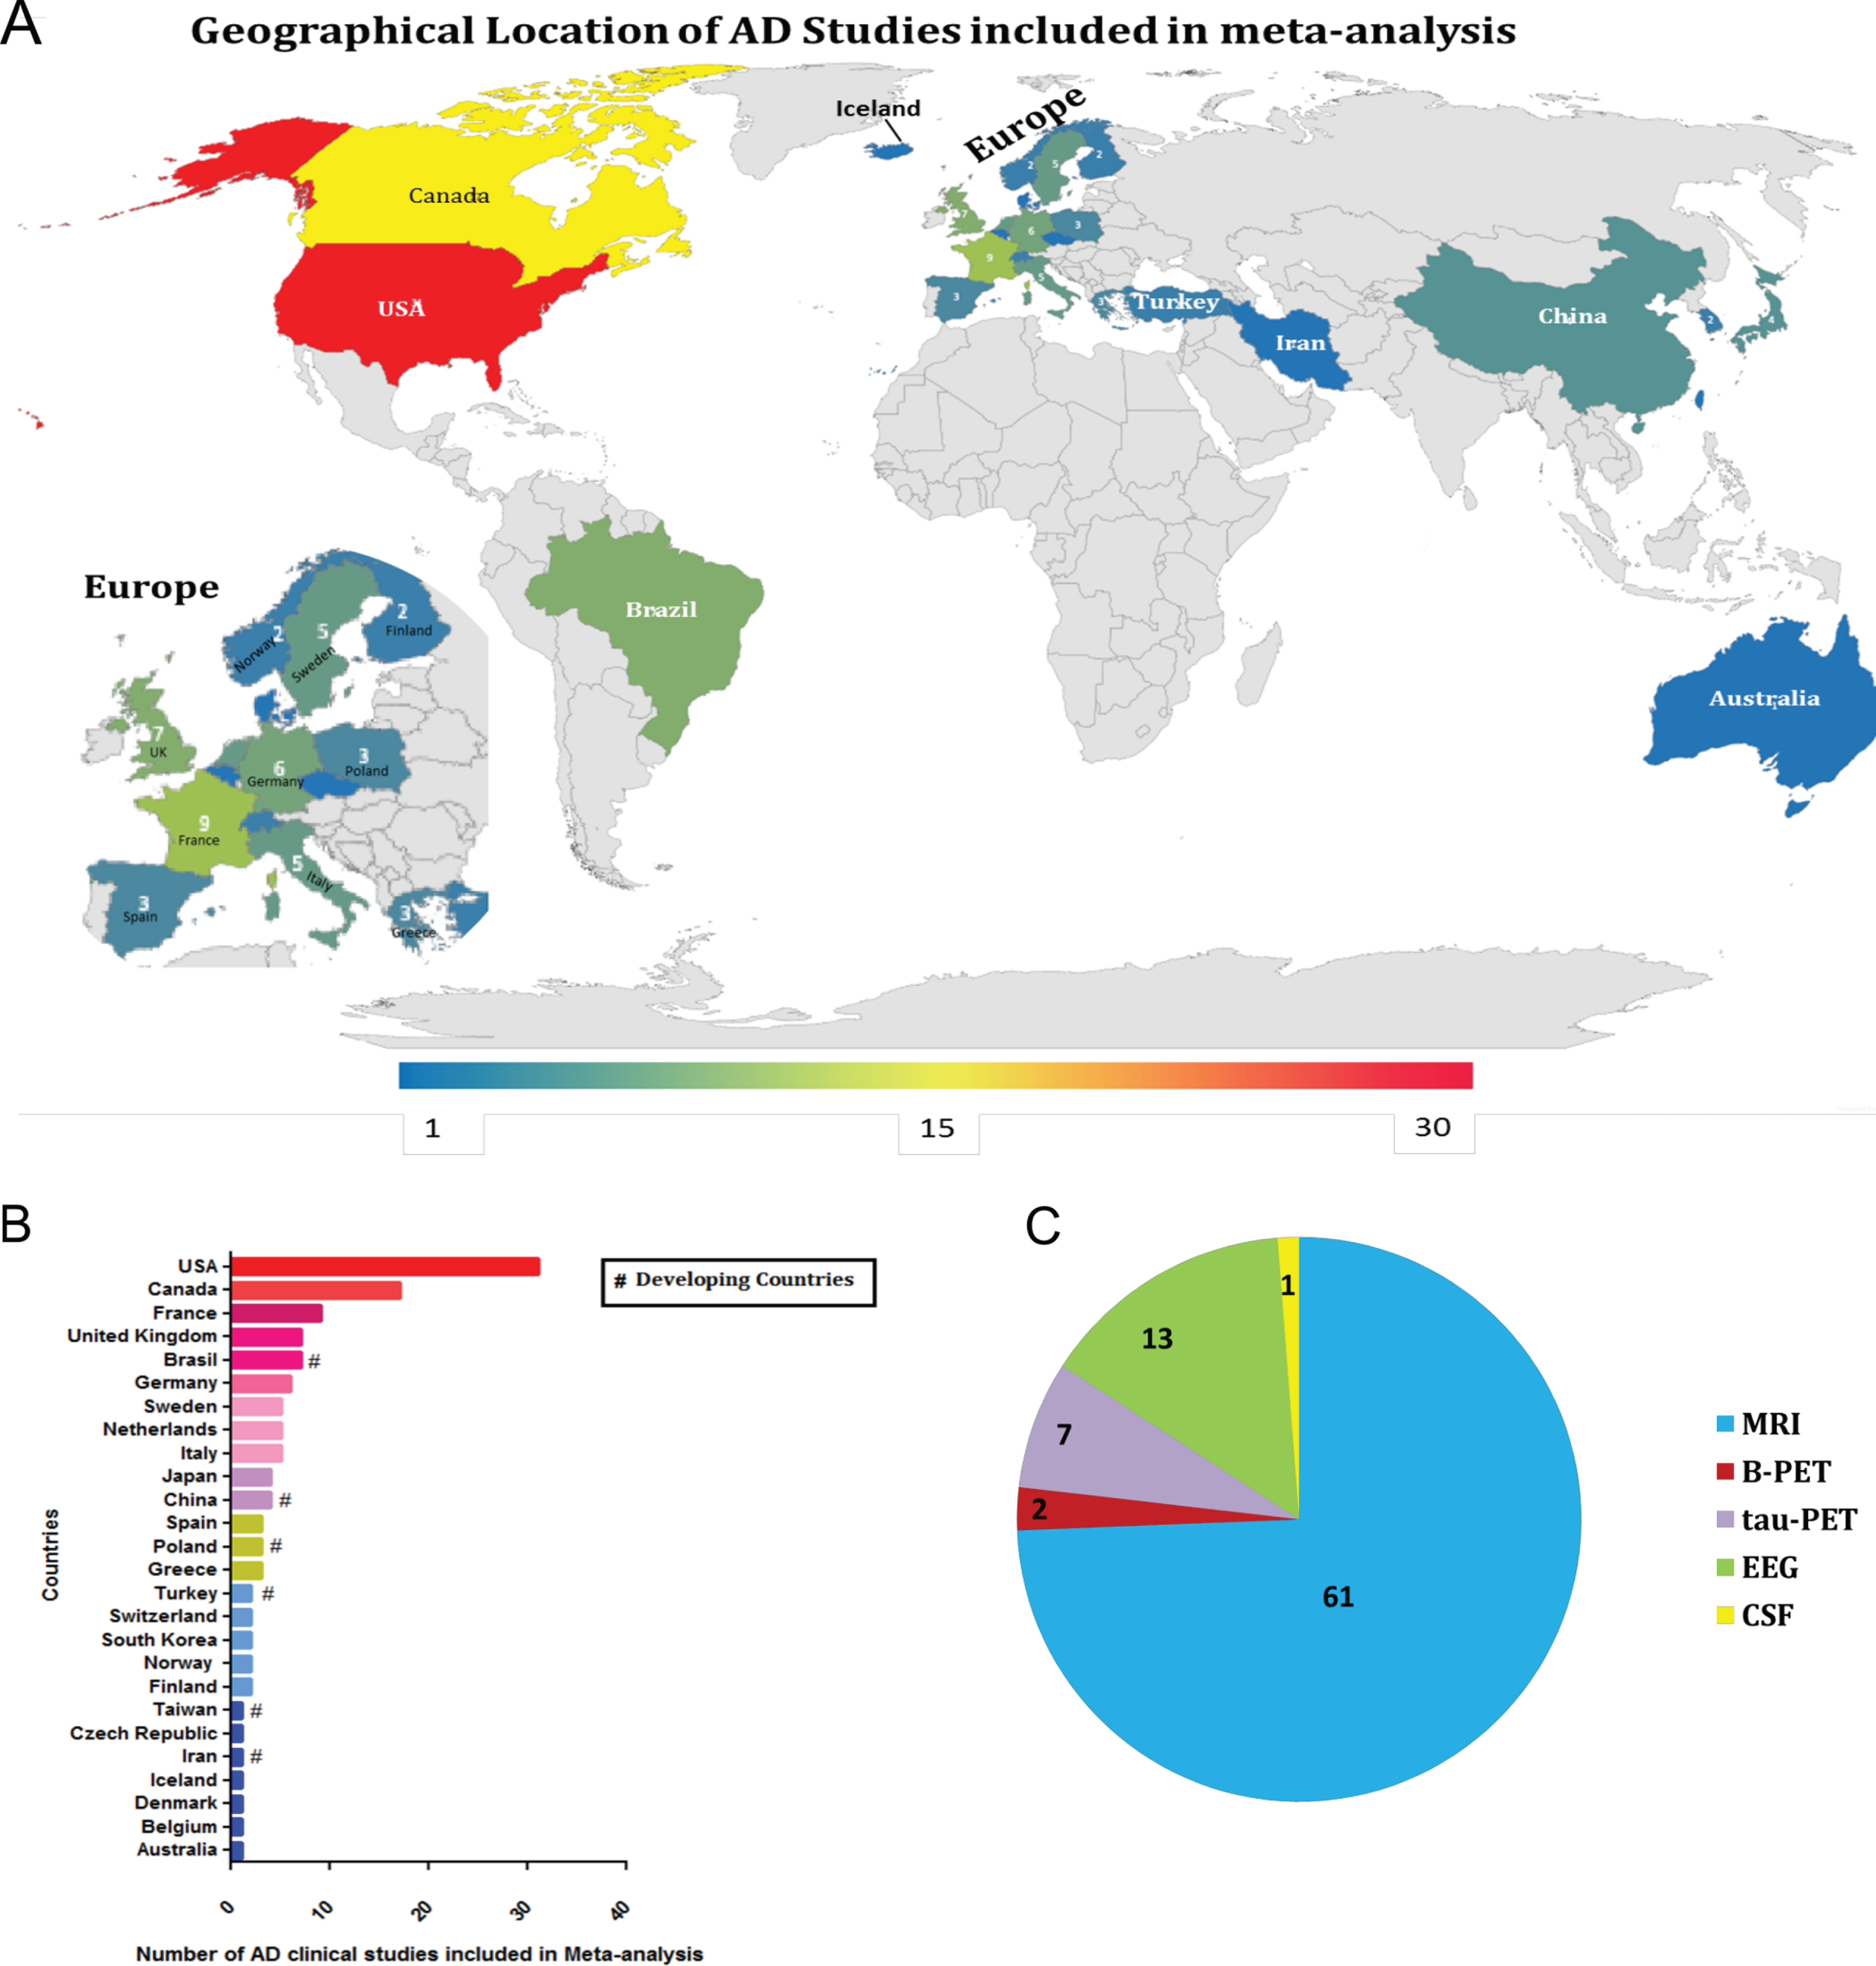 Geographical location of Alzheimer’s disease studies. A) Demographic representation of AD clinical studies worldwide (lower-blue to higher-red numbers). B) The bar chart shows the number of AD studies conducted by different countries included in the meta-analysis. C) The pie chart shows the type of diagnostic tools used in the AD studies for meta-analysis.